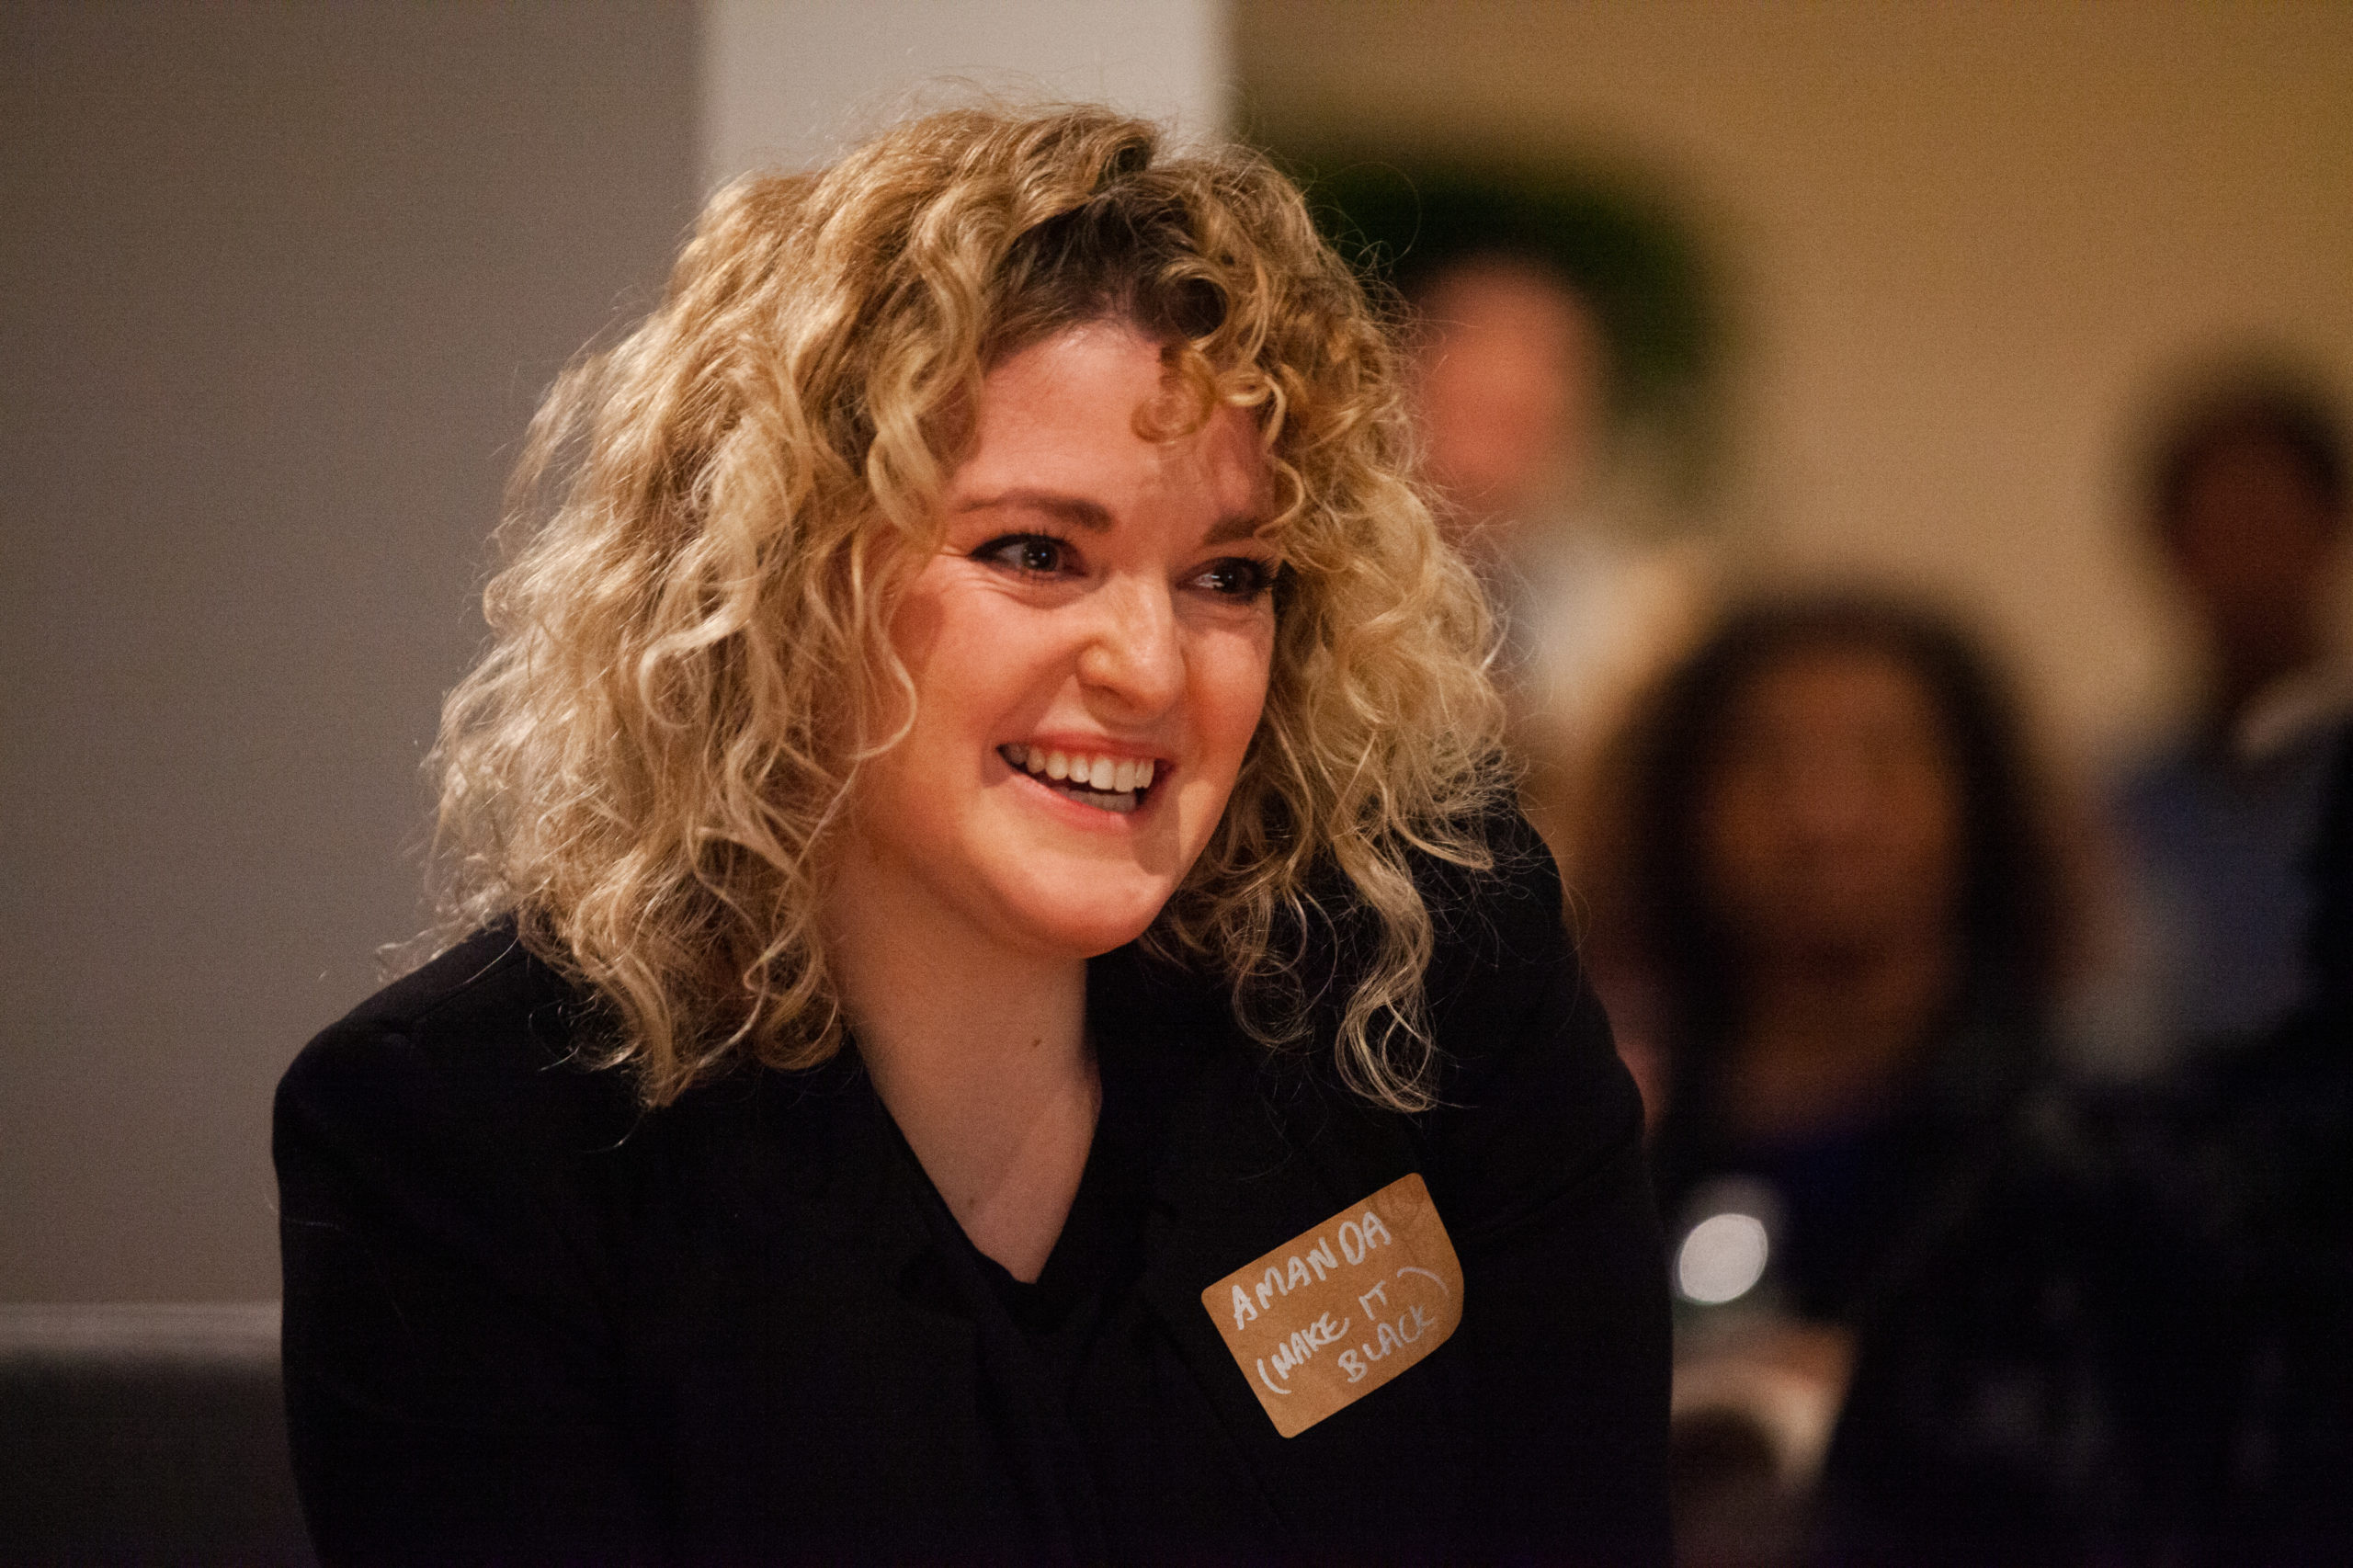 Amanda Grogan, founder of Make it Black, finds out she is the winner of the Make It in Brooklyn Female Founders pitch contest. Photo: Paul Frangipane/Brooklyn Eagle